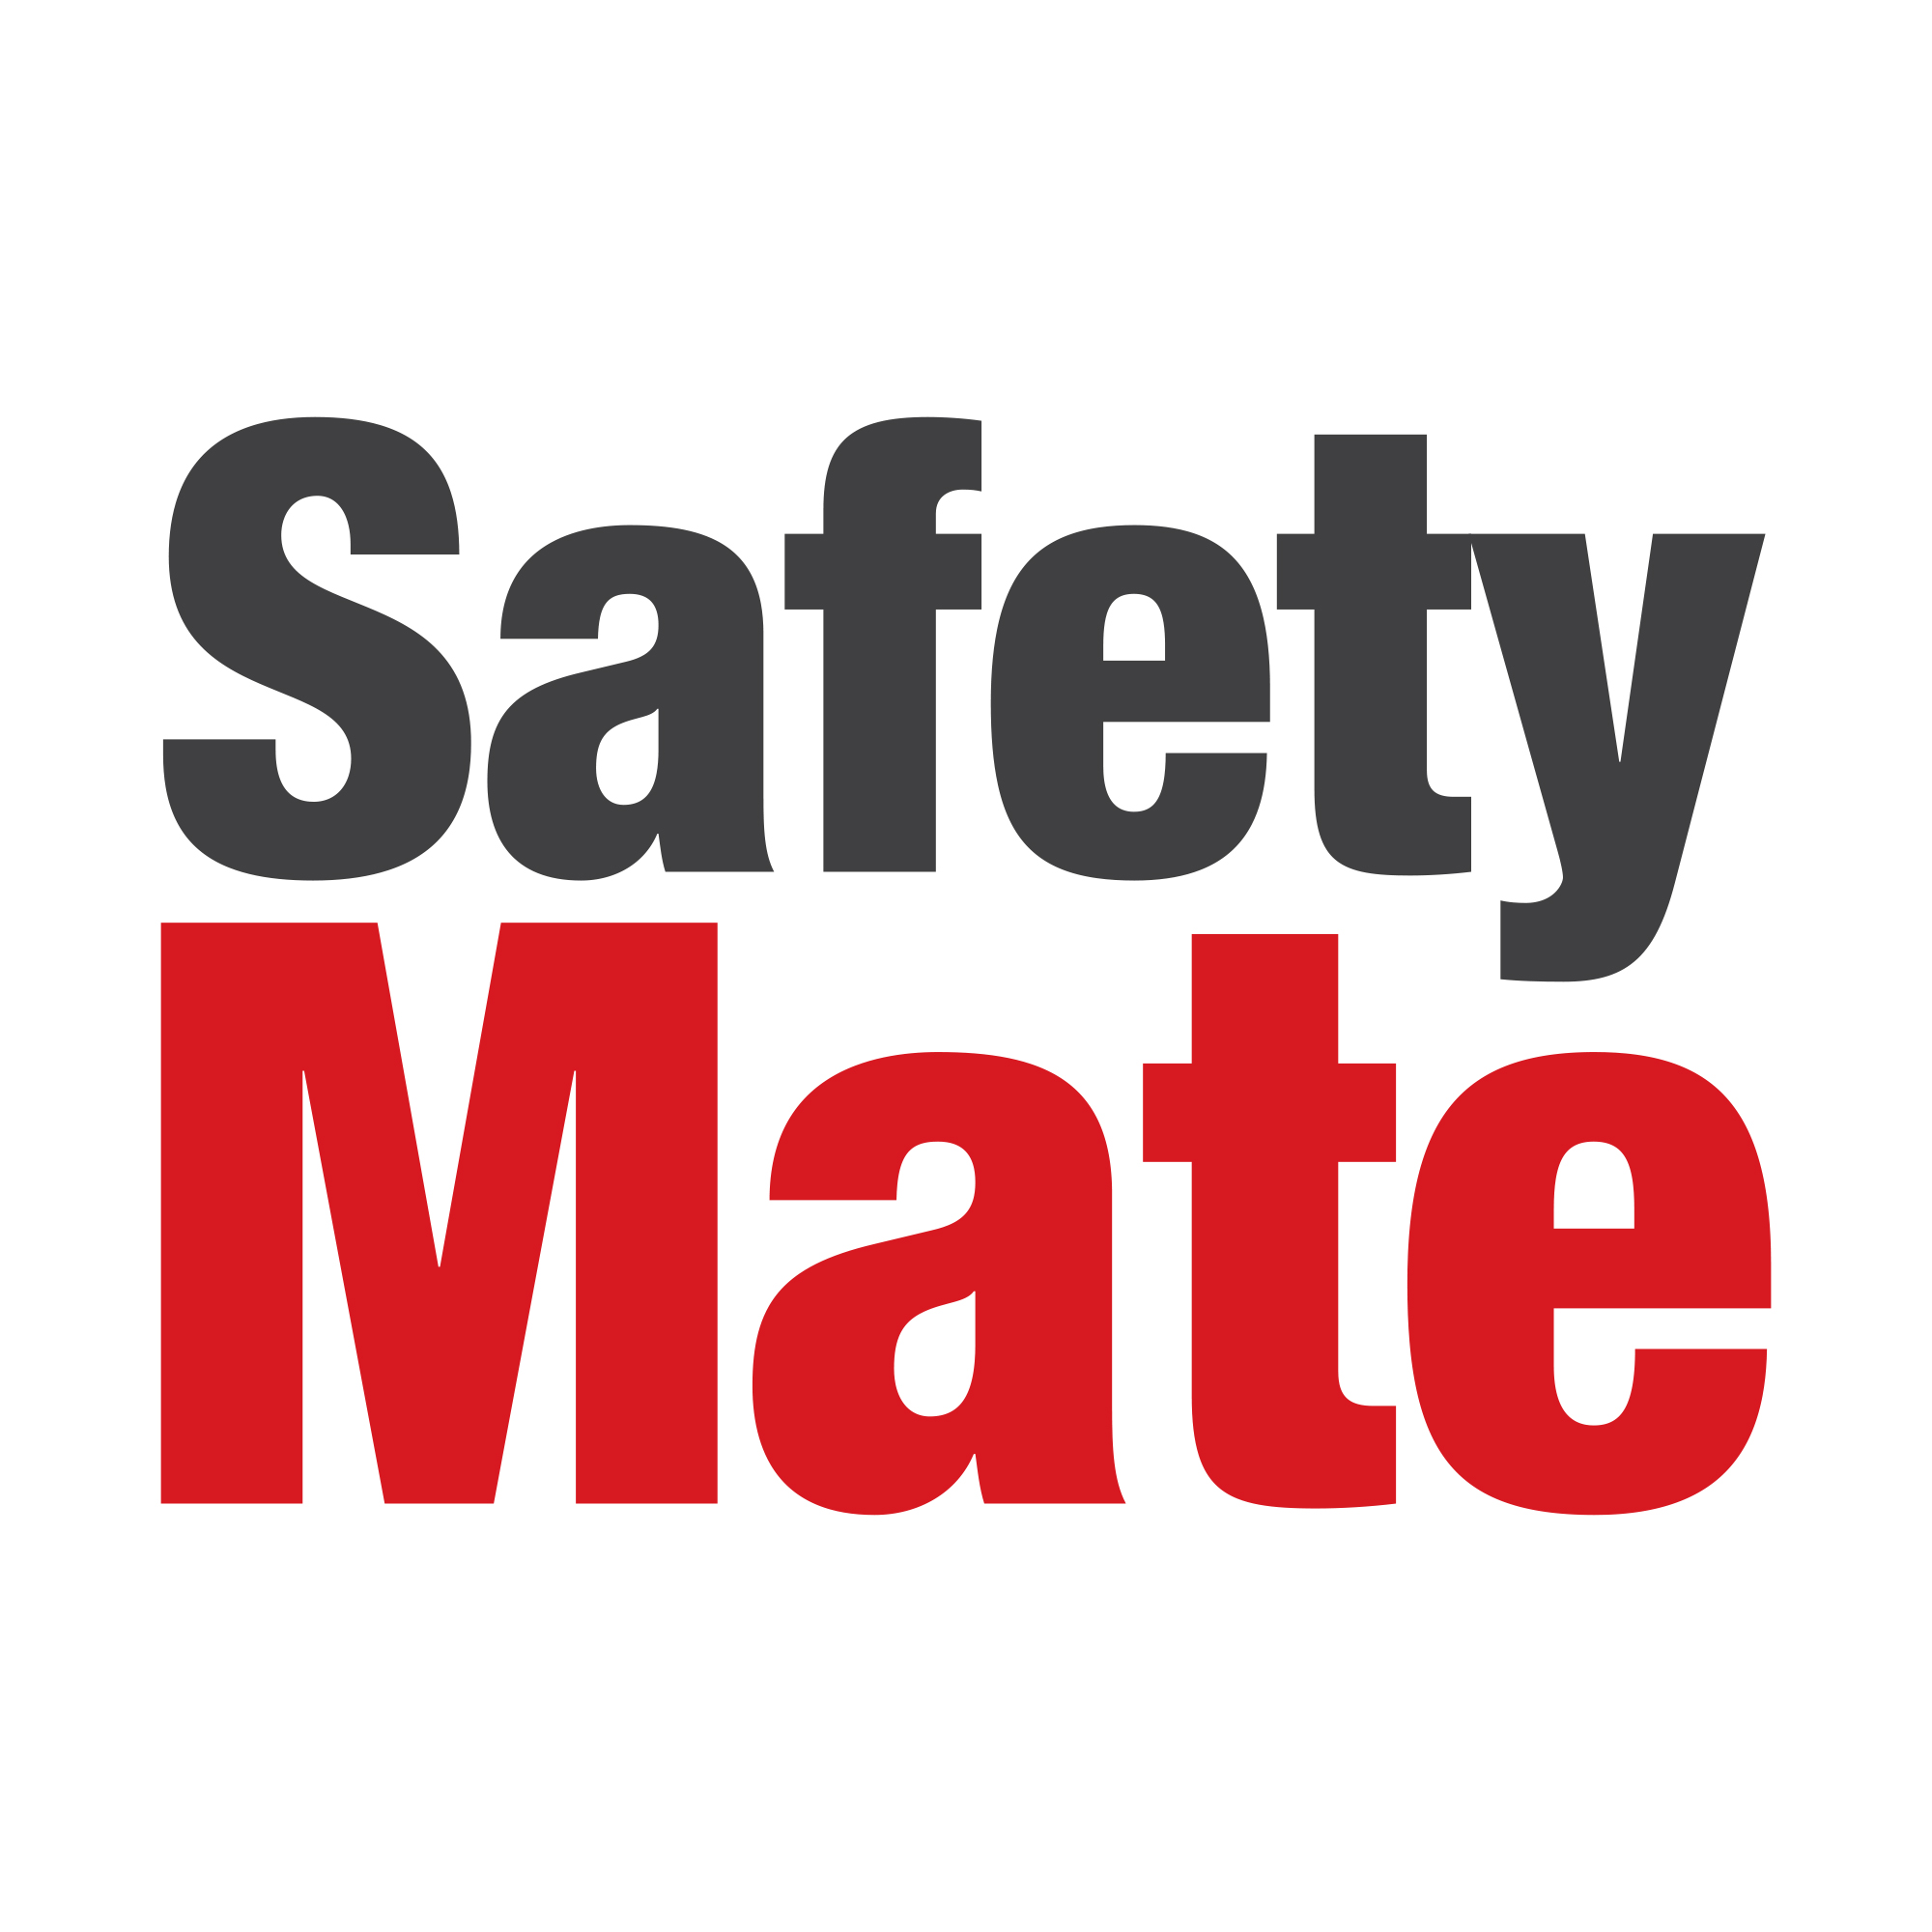 Safety Mate